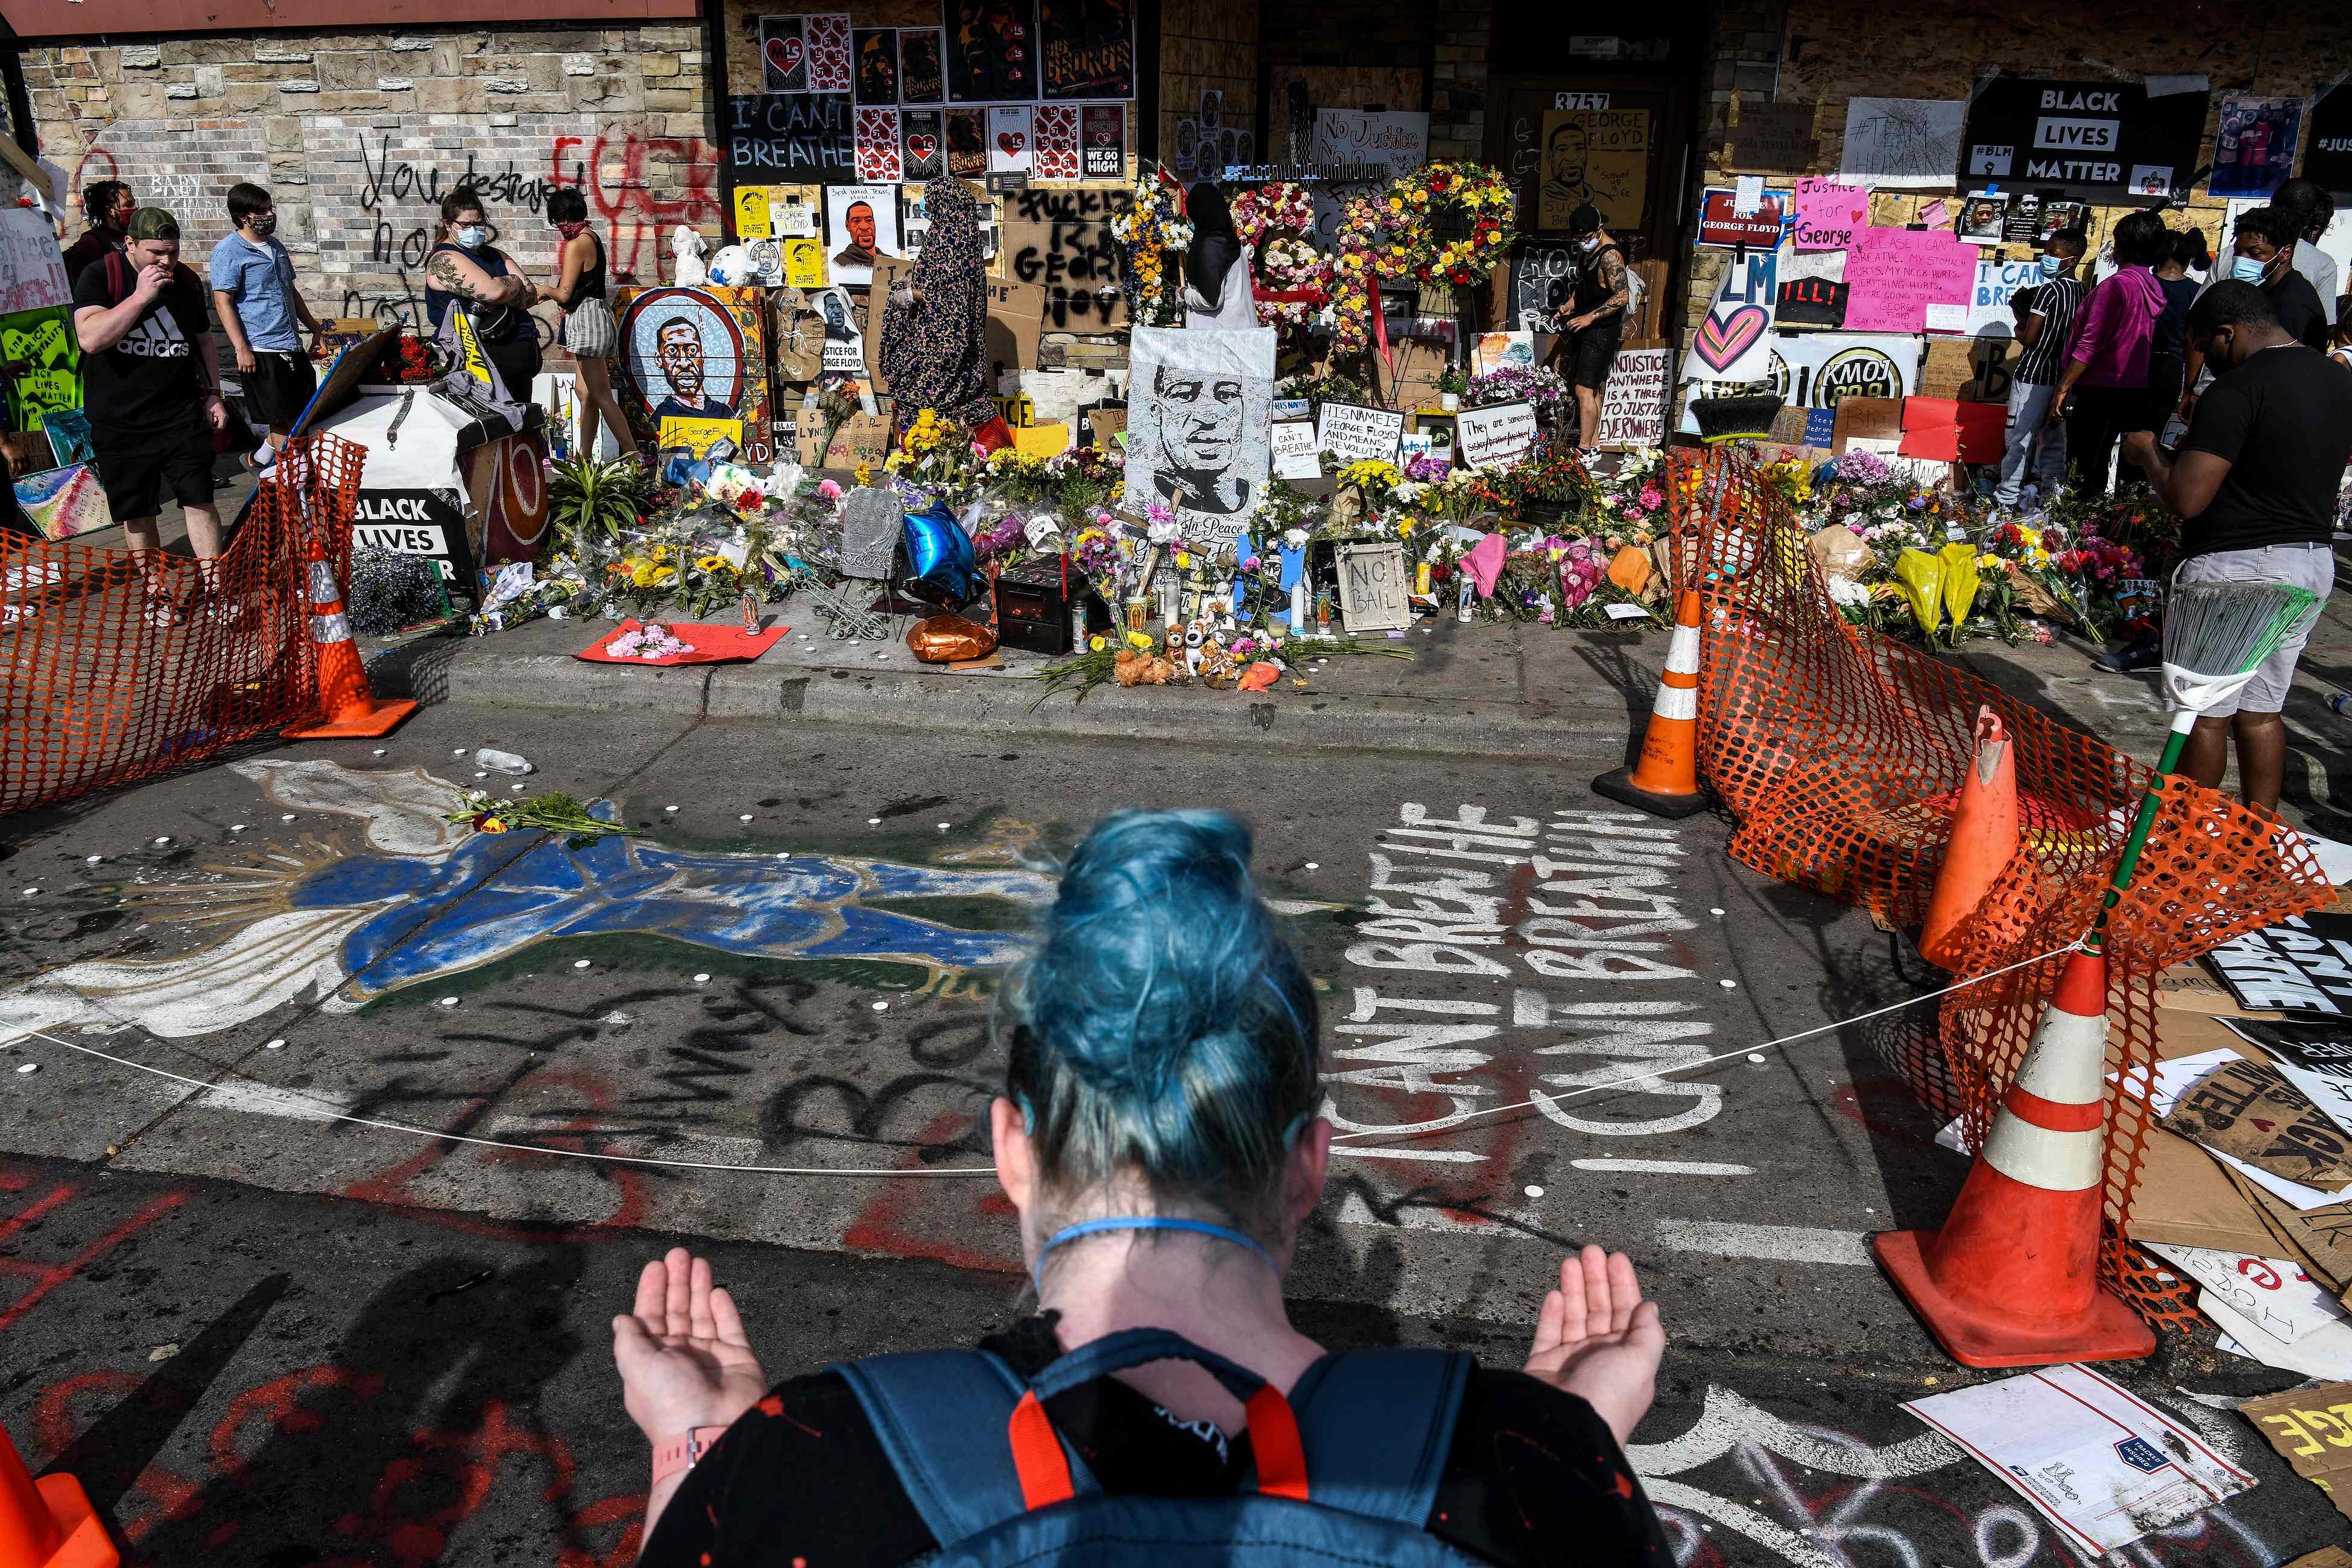 A woman offers prayers as she pays her respects at a makeshift memorial in honour of George Floyd, on June 3, 2020 in Minneapolis, Minnesota. Credit: AFP